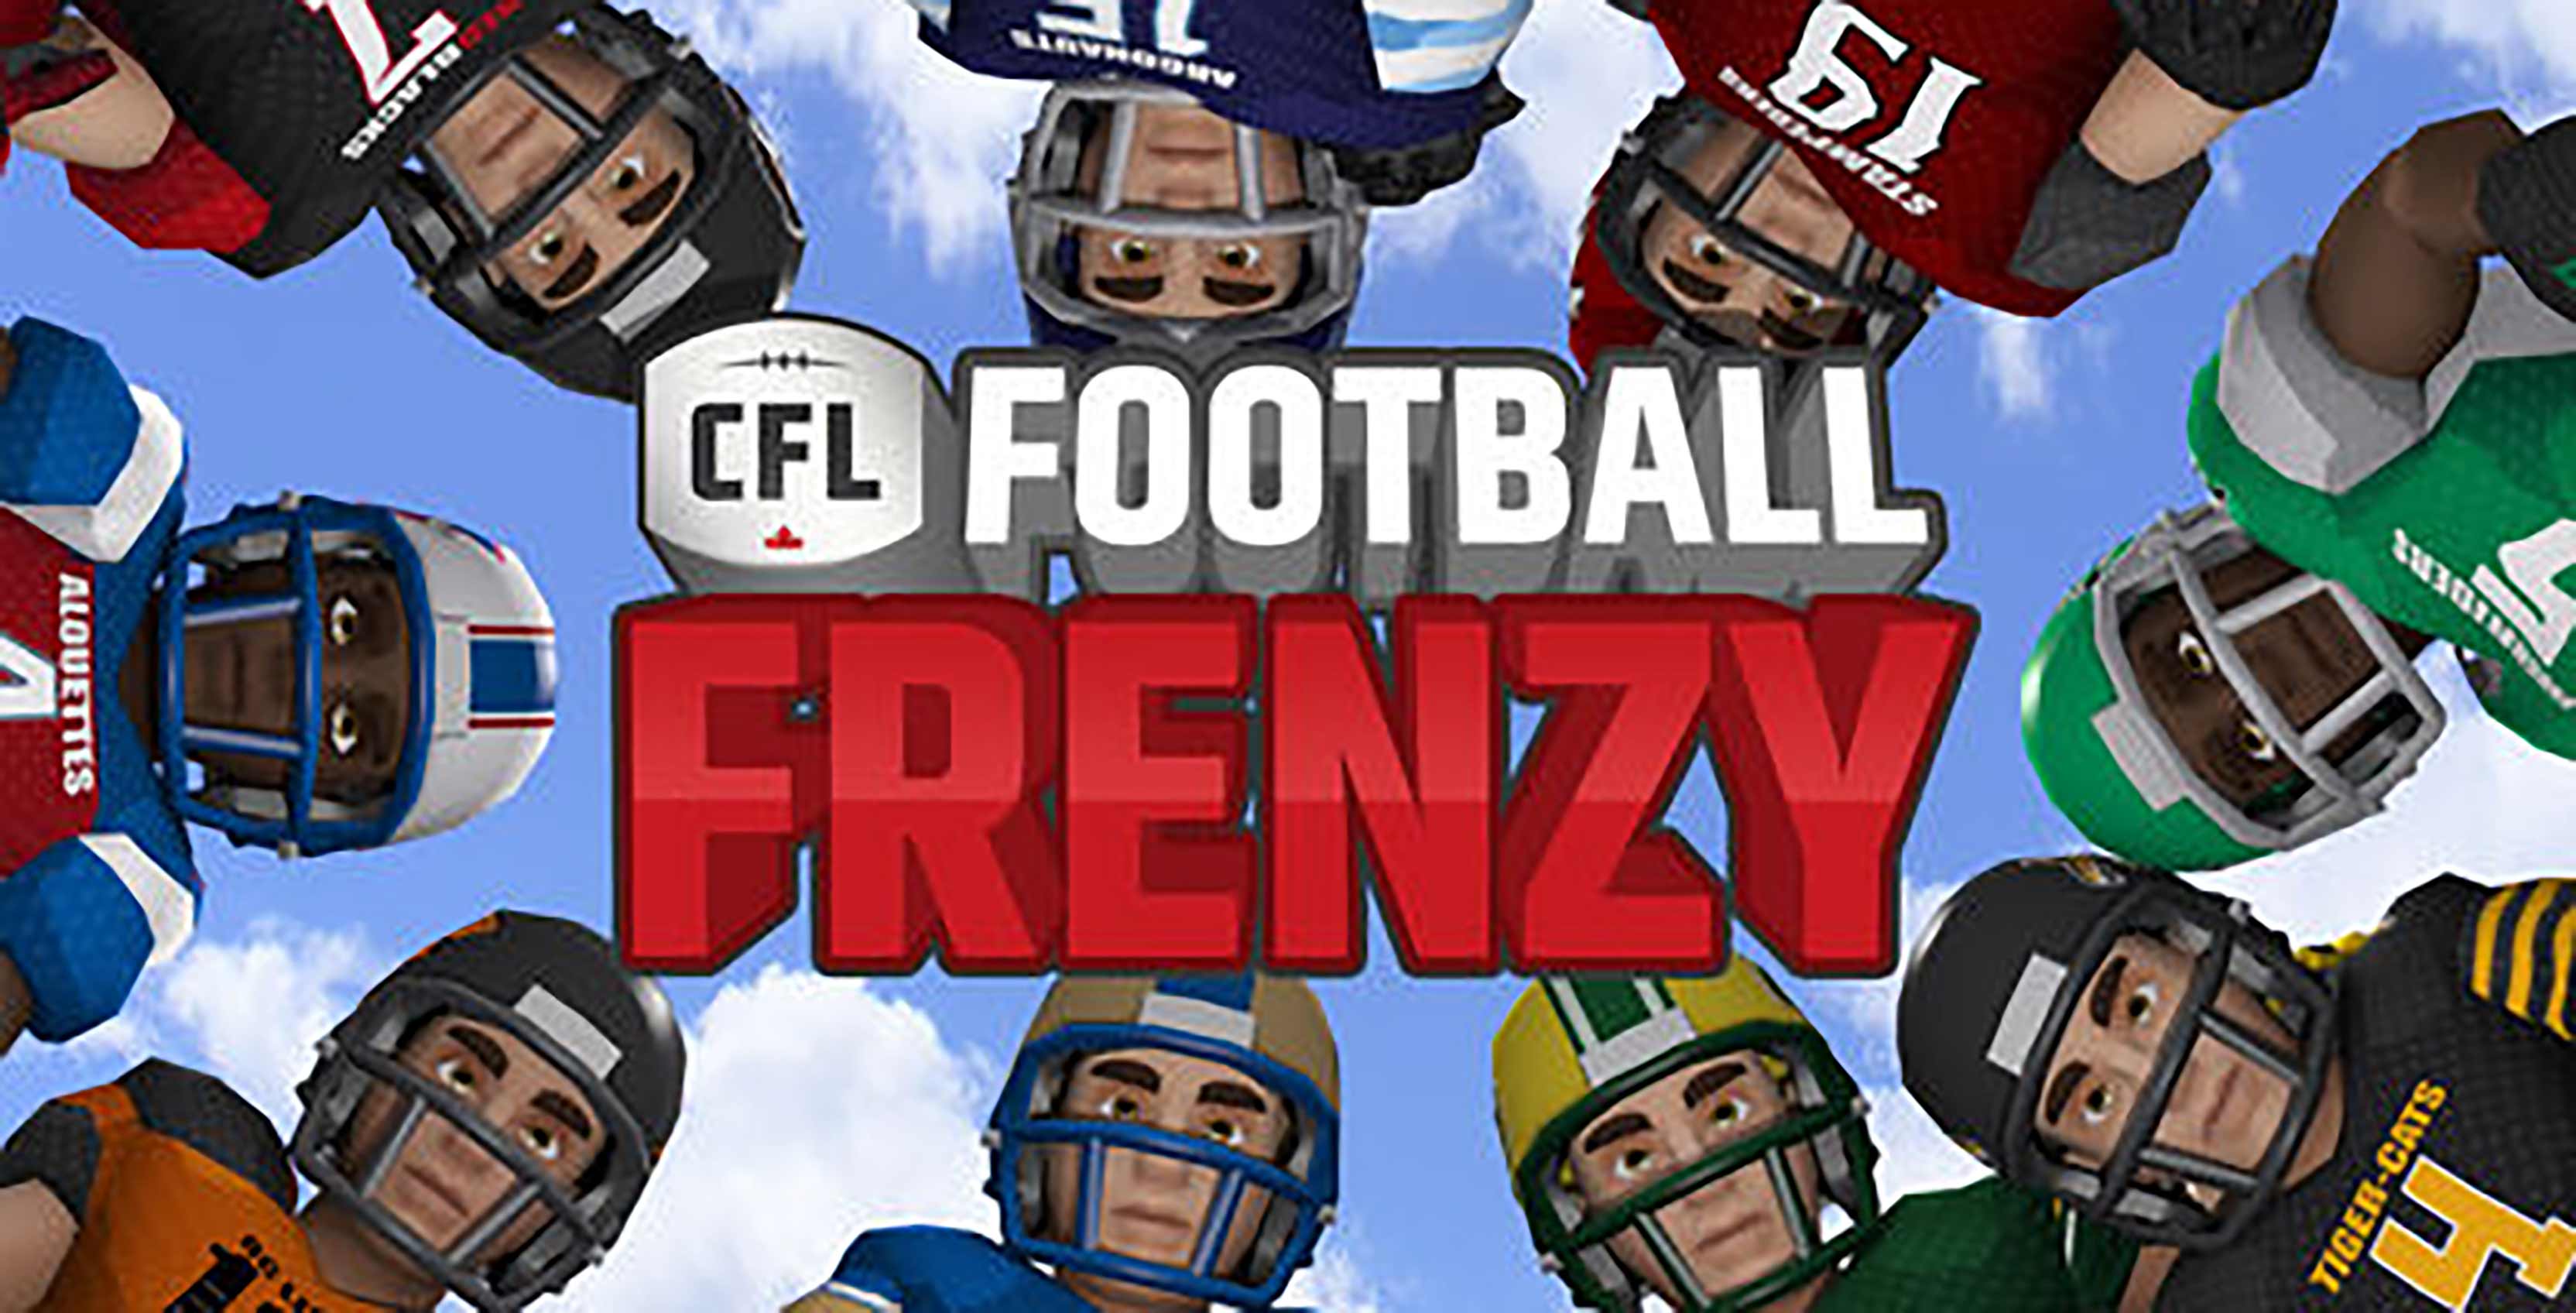 CFL football frenzy which features football avatars